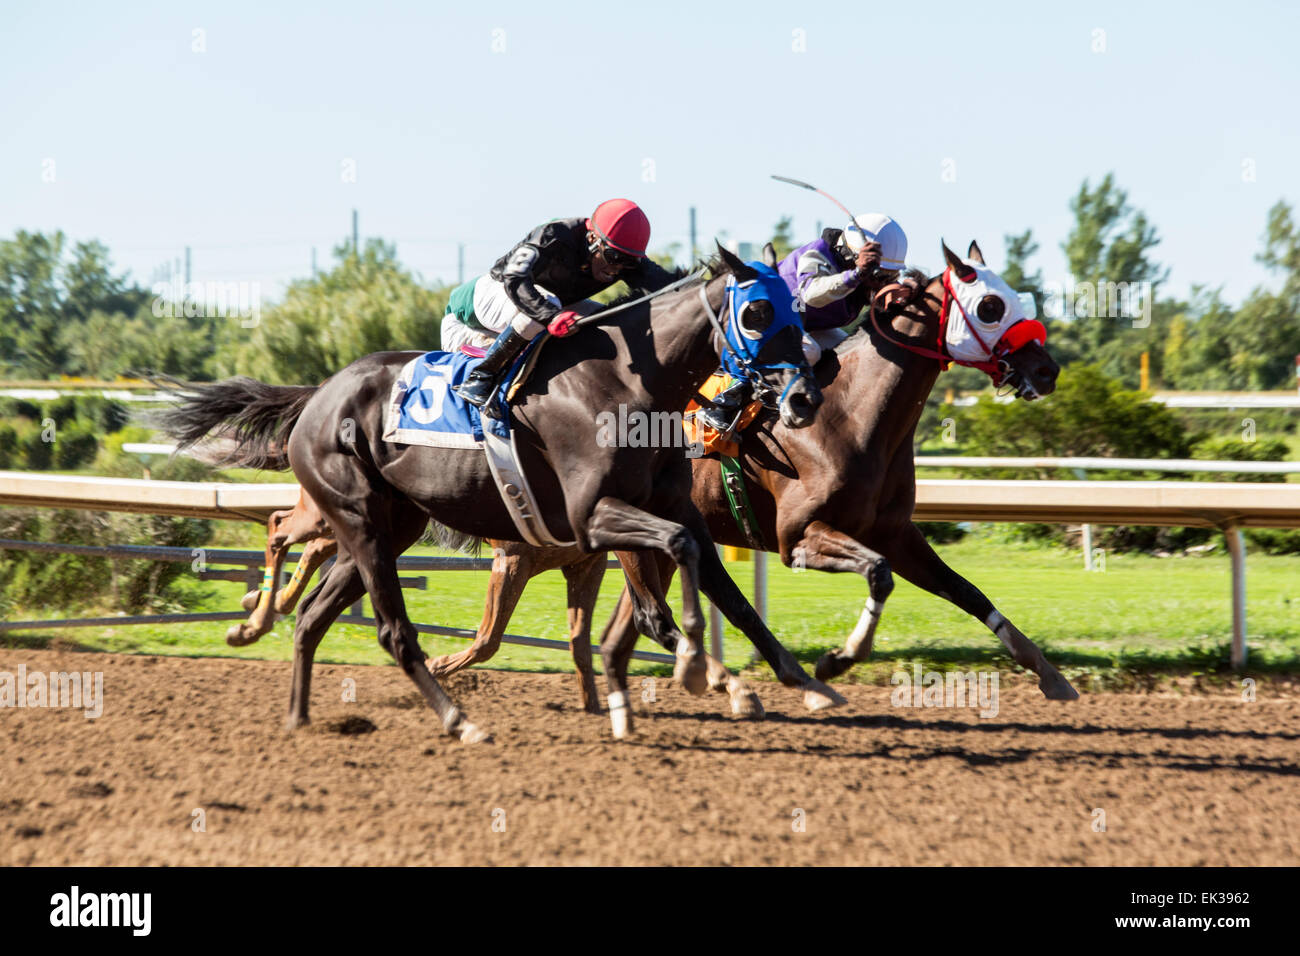 Canada,Ontario,Fort Erie, Fort Erie Race track, horse race Stock Photo